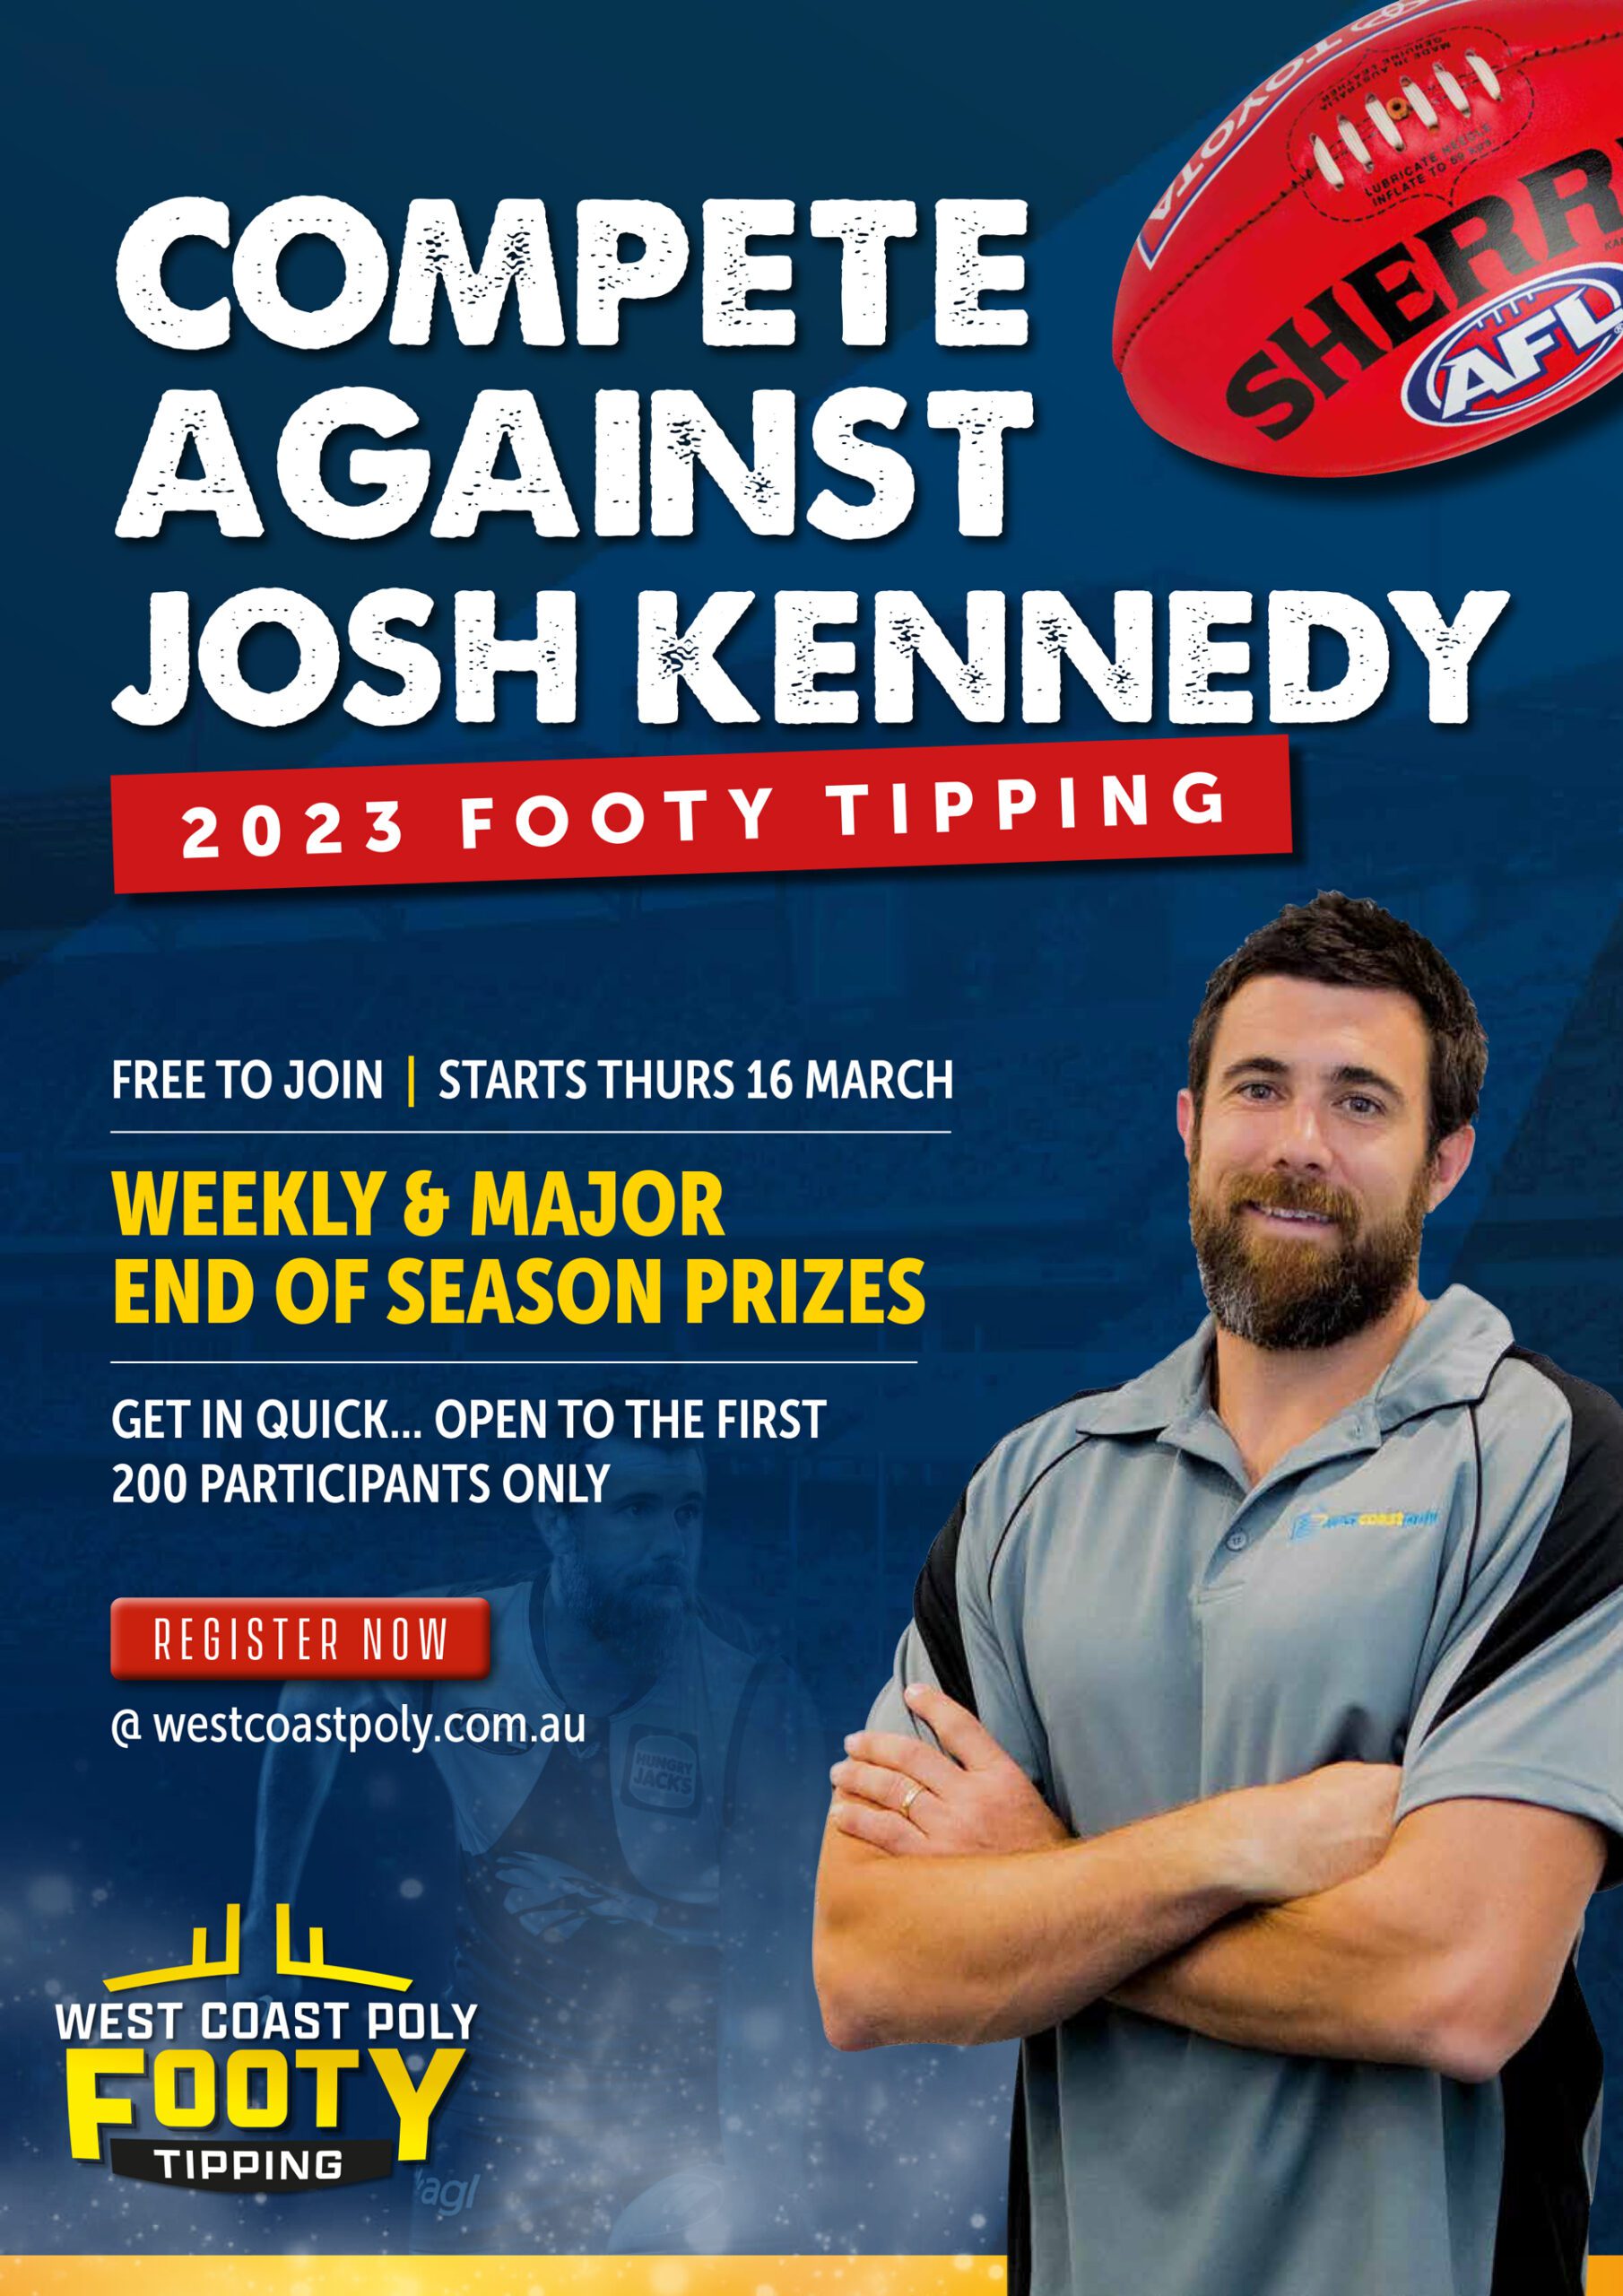 West Coast Poly 2023 Footy Tipping Competition - Free To Join - Weekly Prizes + Major Prize At The End Of The Season - Compete Against Josh Kennedy